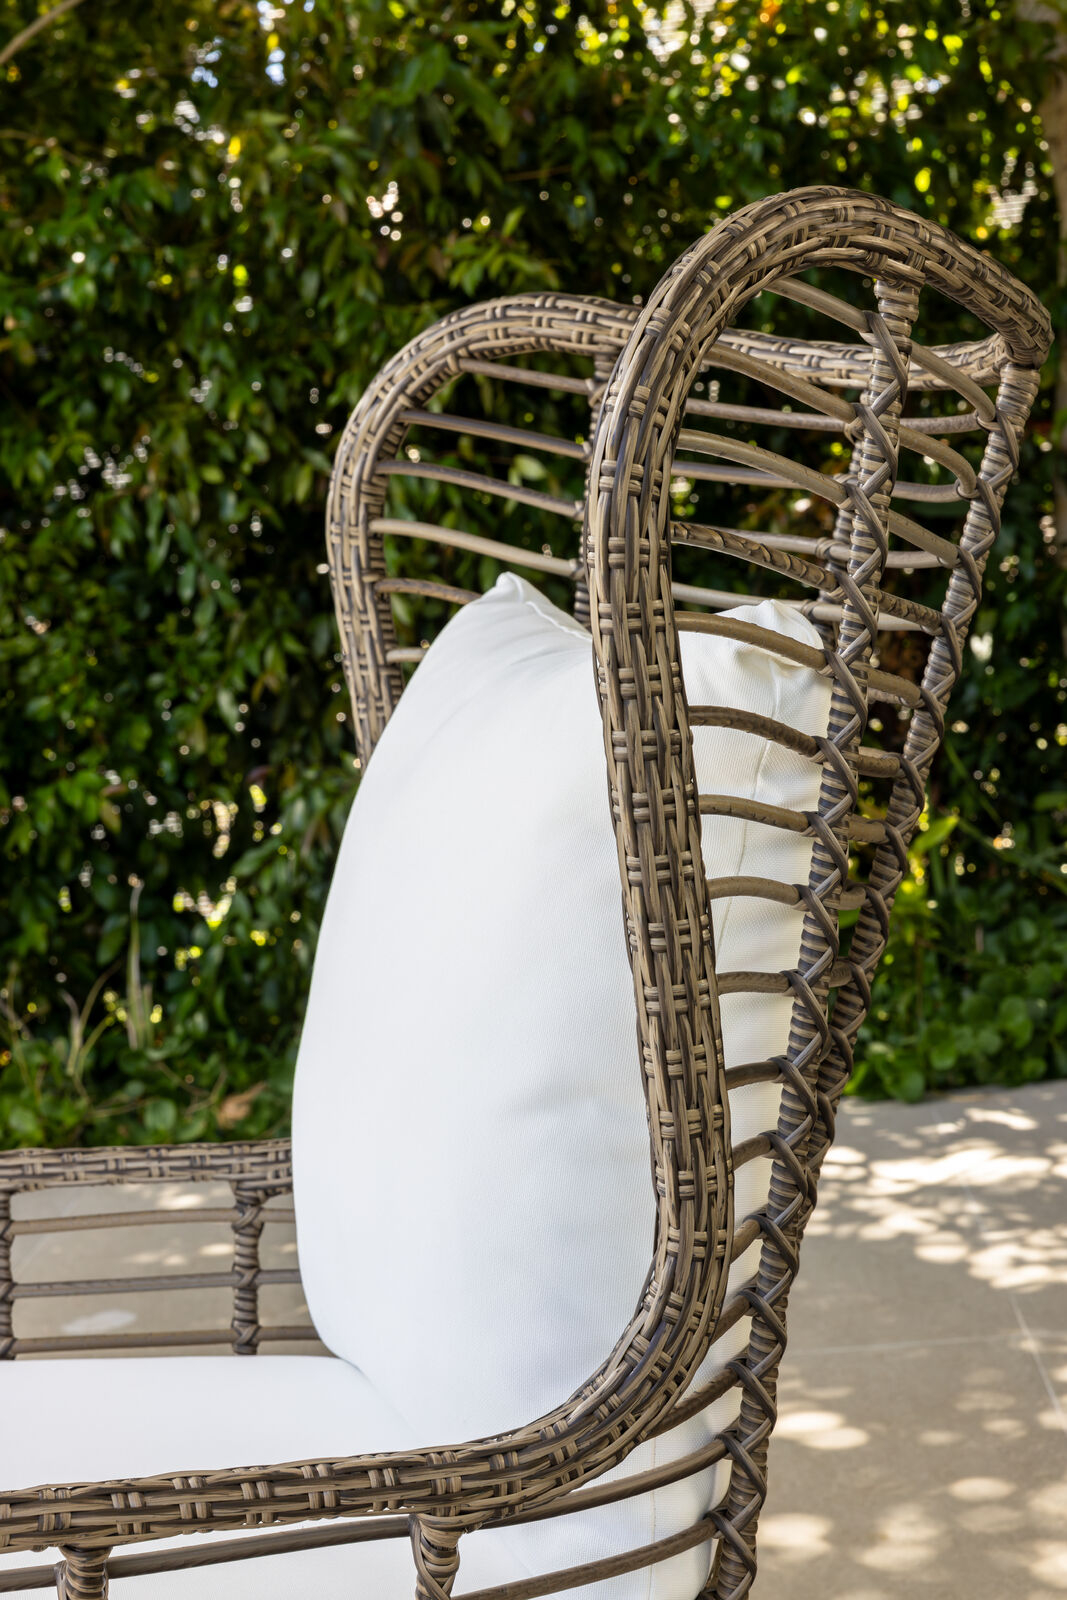 Outdoor accent chair with white cushions 